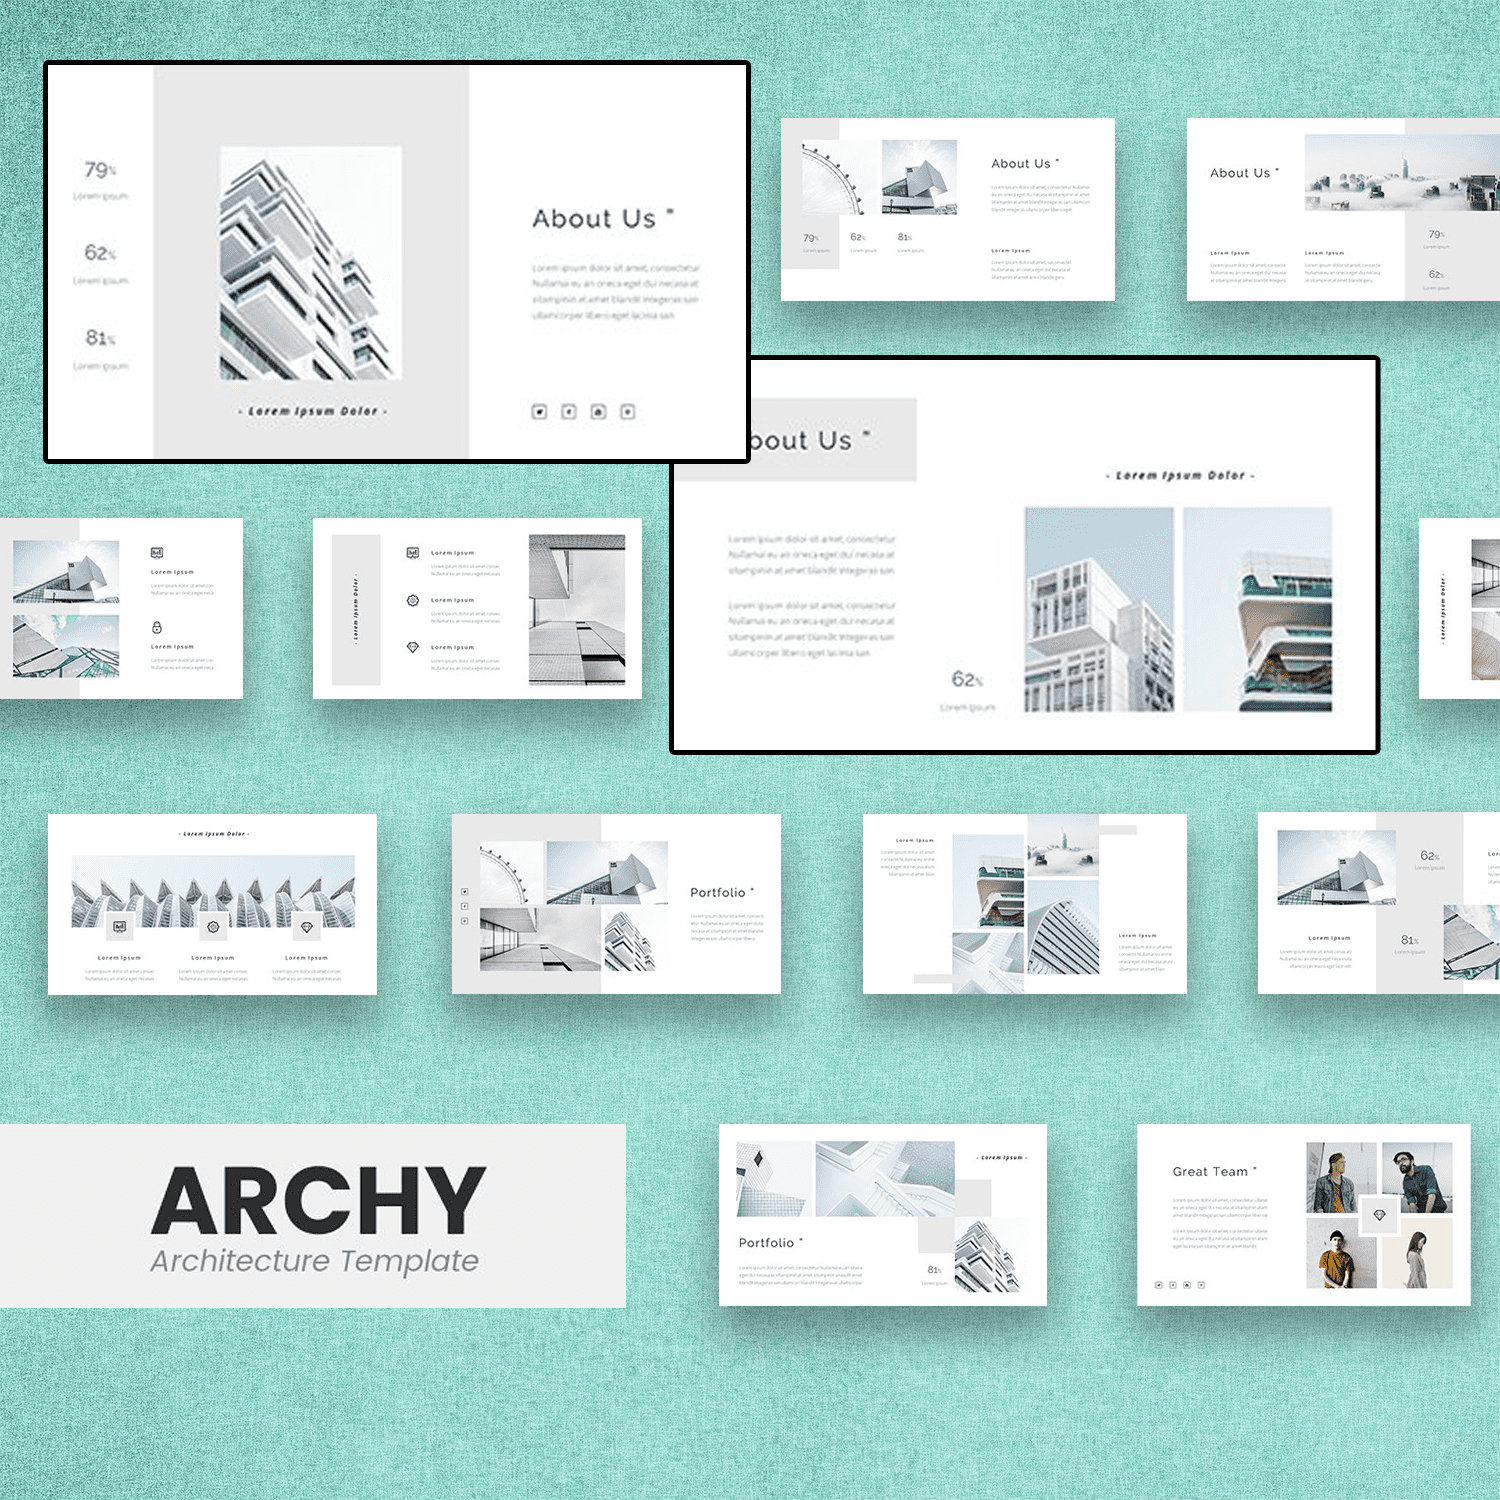 This Architecture template is designed for those who are looking for templates that fulfills their specific industrial needs.